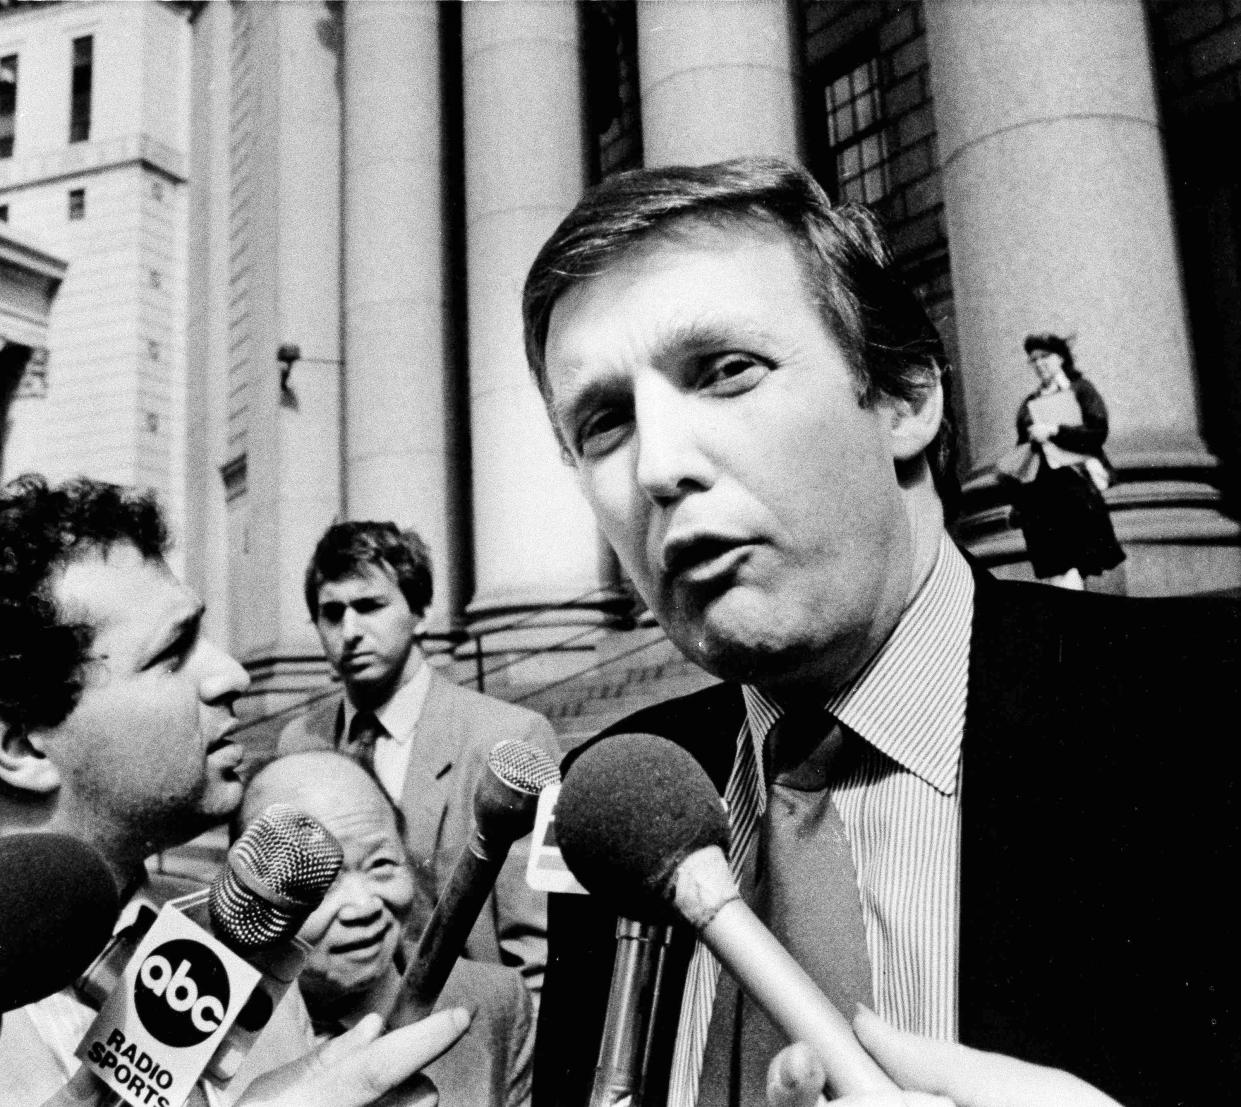 Donald Trump, real estate mogul and owner of the USFL's New Jersey Generals, speaks to the press as he walks out of federal court in New York on May 14, 1986. A federal court jury heard vivid charges of intrigue and conspiracy in the world of professional football as the USFL's $1.32 billion anti-trust suit against the NFL opened Wednesday with sharply contrasting views of the battle between the two leagues.